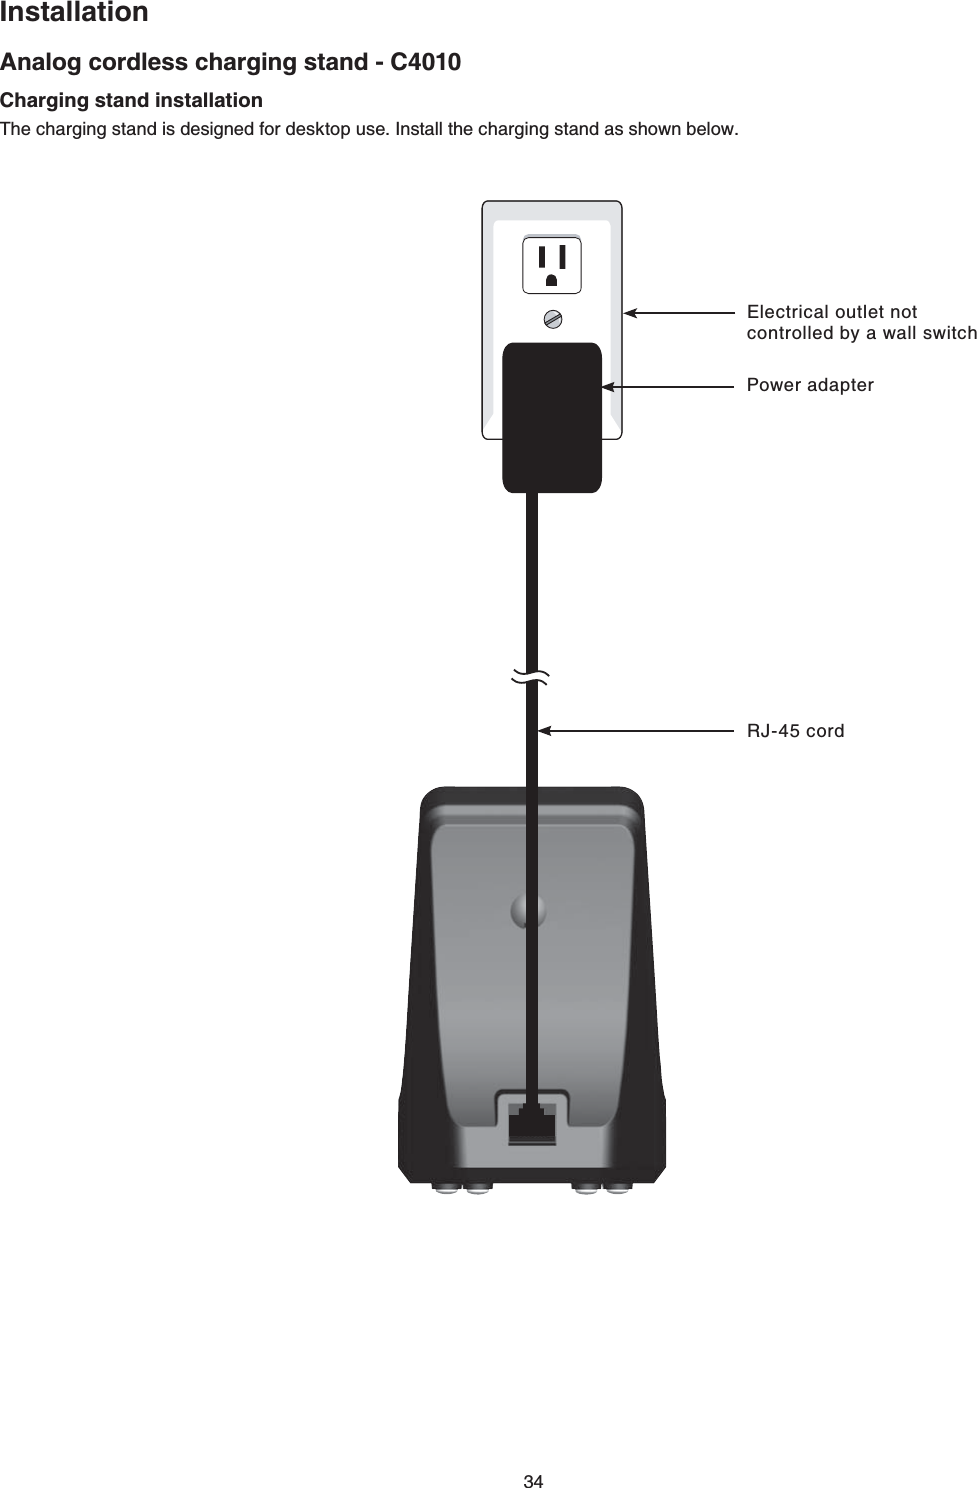 34Analog cordless charging stand - C4010InstallationCharging stand installationThe charging stand is designed for desktop use. Install the charging stand as shown below.Power adapterElectrical outlet not controlled by a wall switchRJ-45 cord